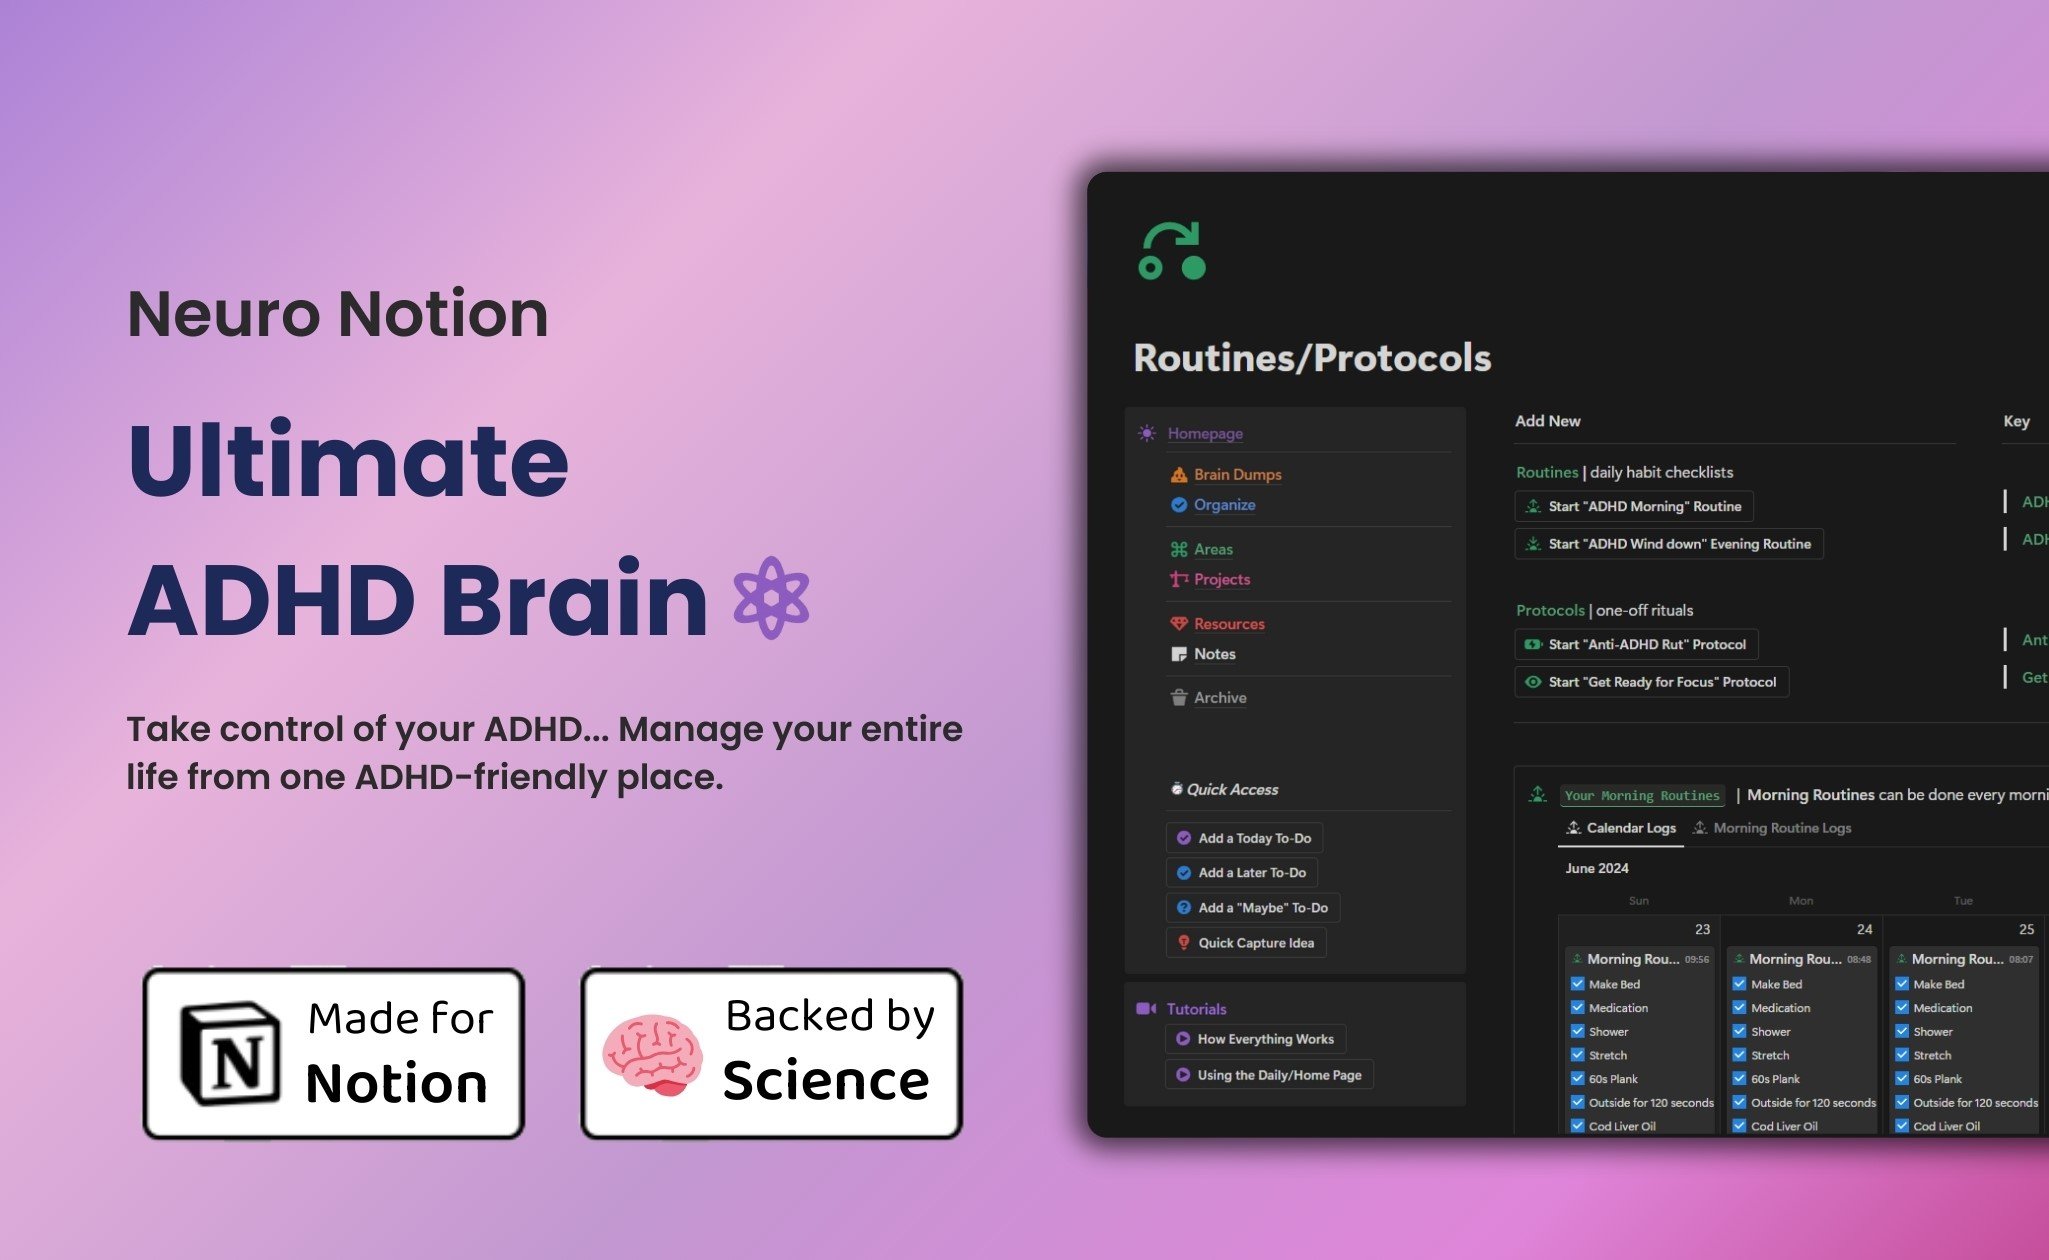 The Ultimate ADHD Brain is the first all-in-one life management system built around and scientifically designed specifically for the ADHD brain.

If you're struggling with your ADHD, and don't know how to take back control, this template has the potential to change your life.